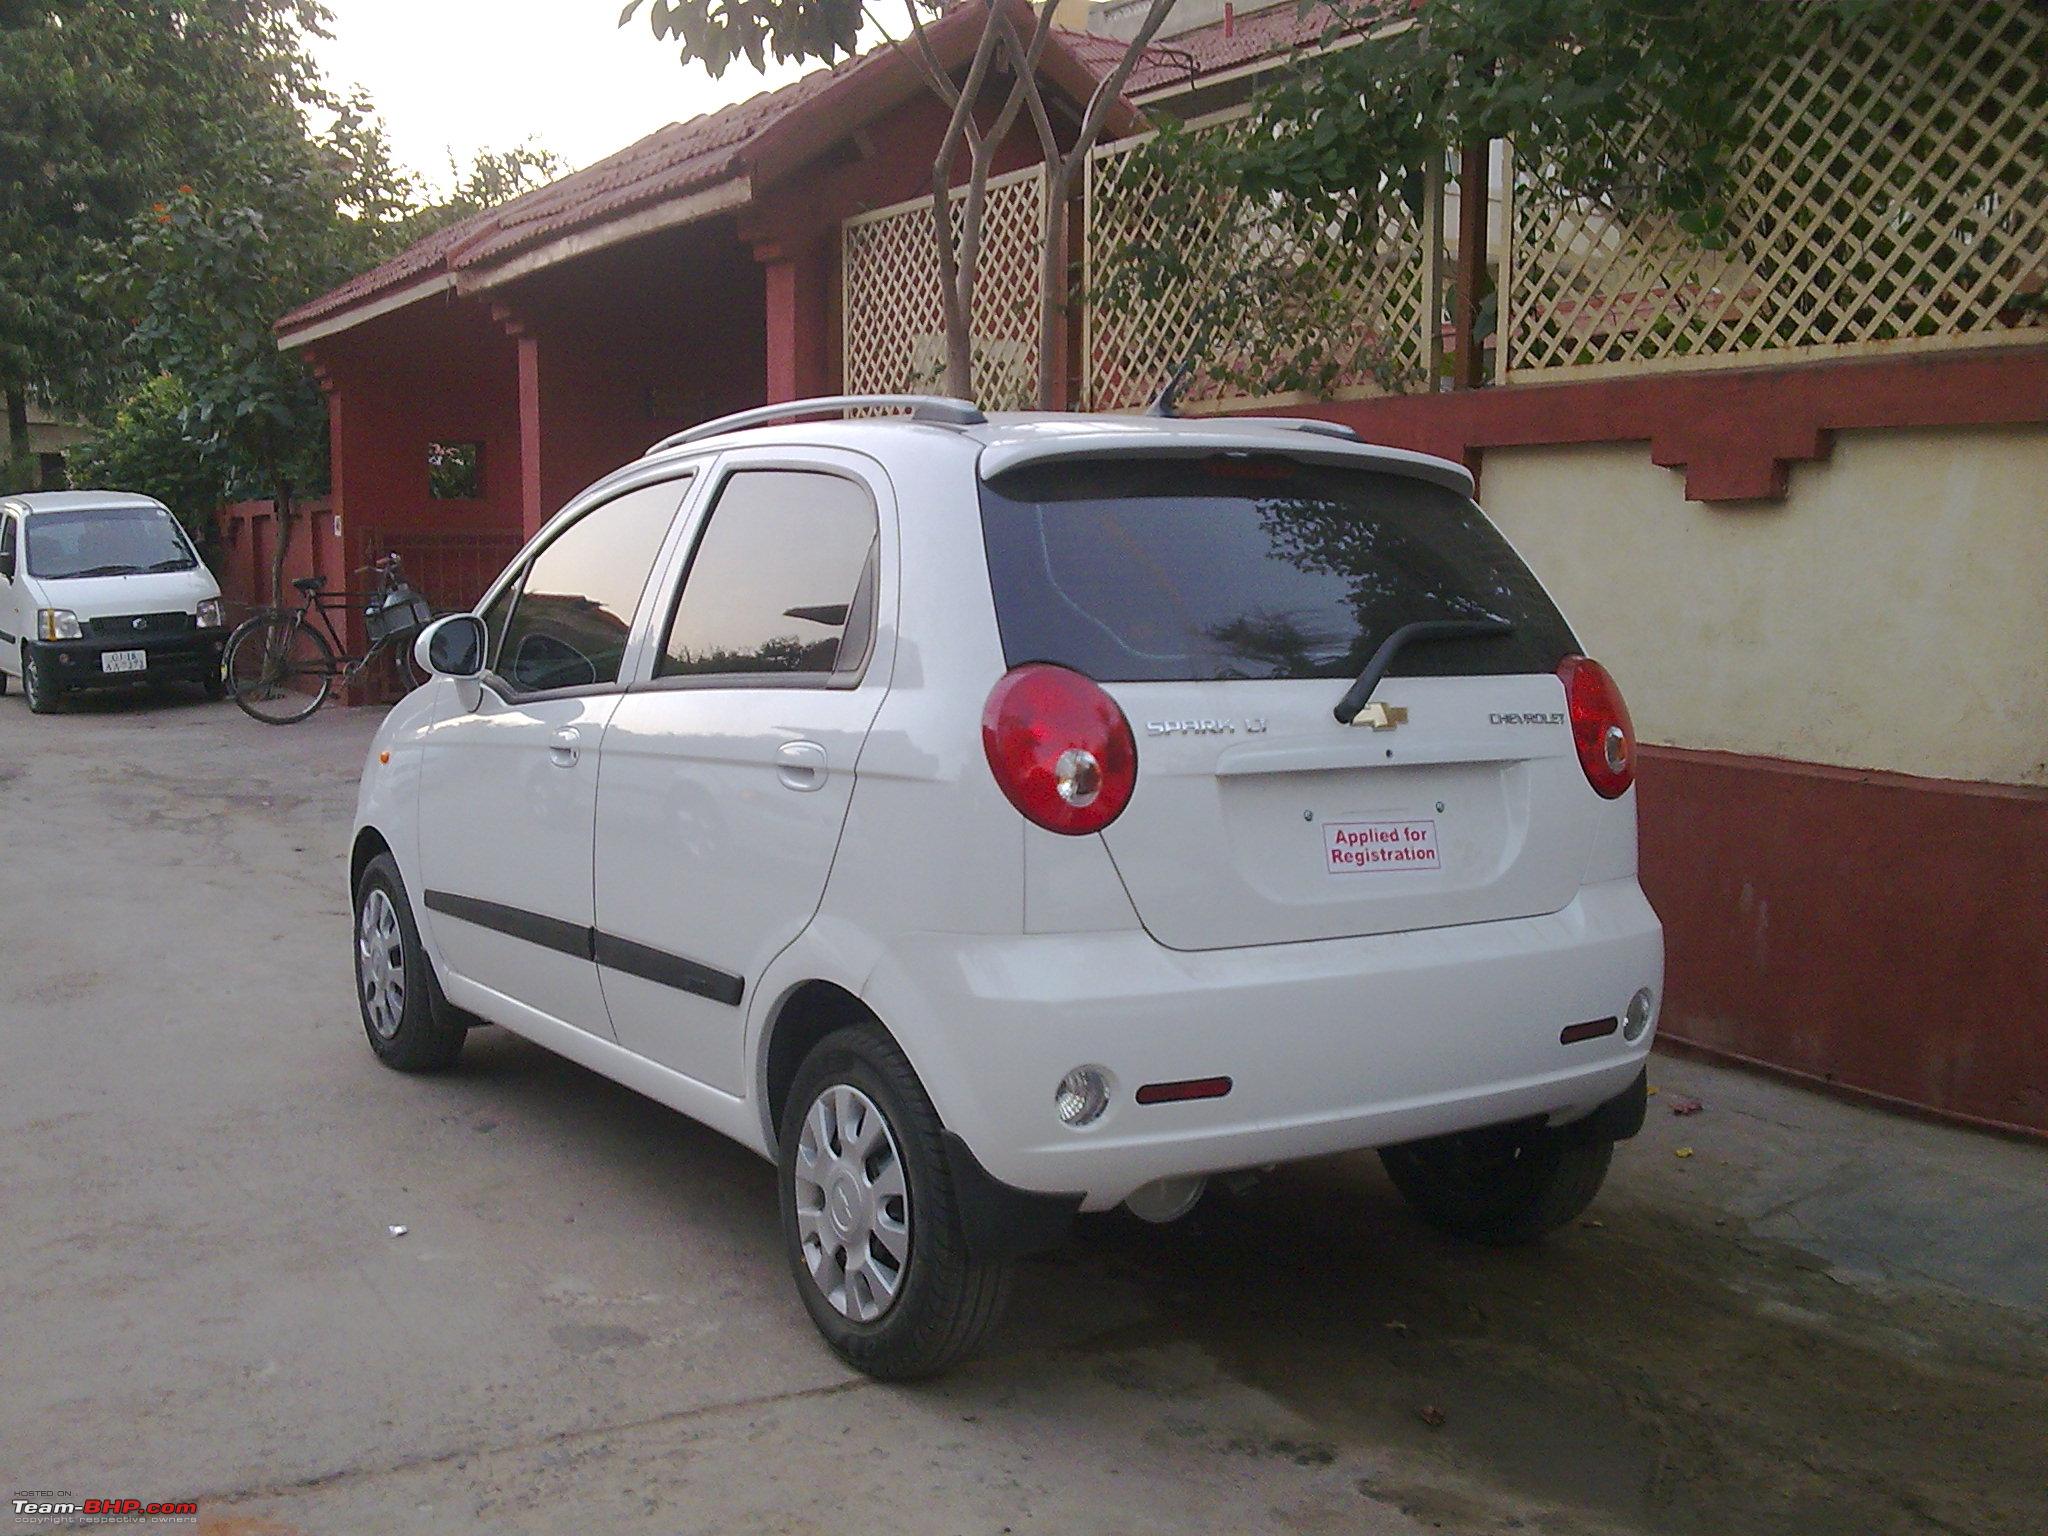 Chevrolet Spark 2004 Review, Amazing Pictures and Images